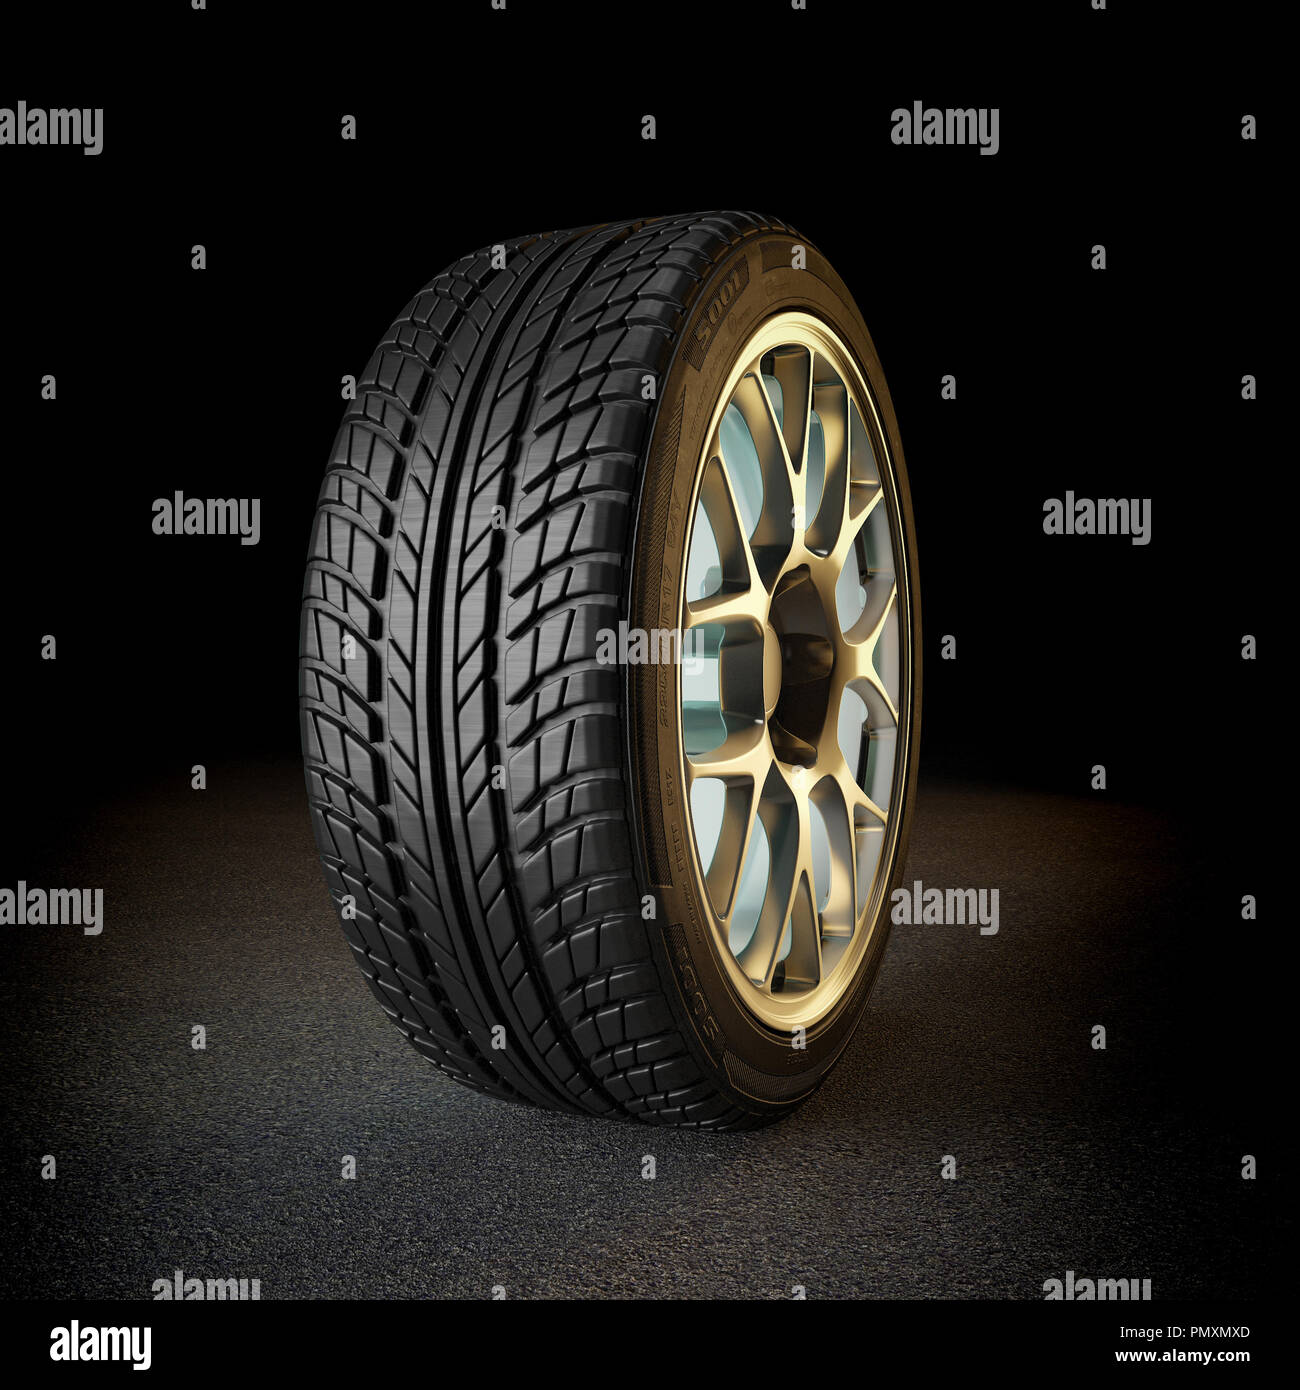 tire with golden rim 3d rendering image Stock Photo